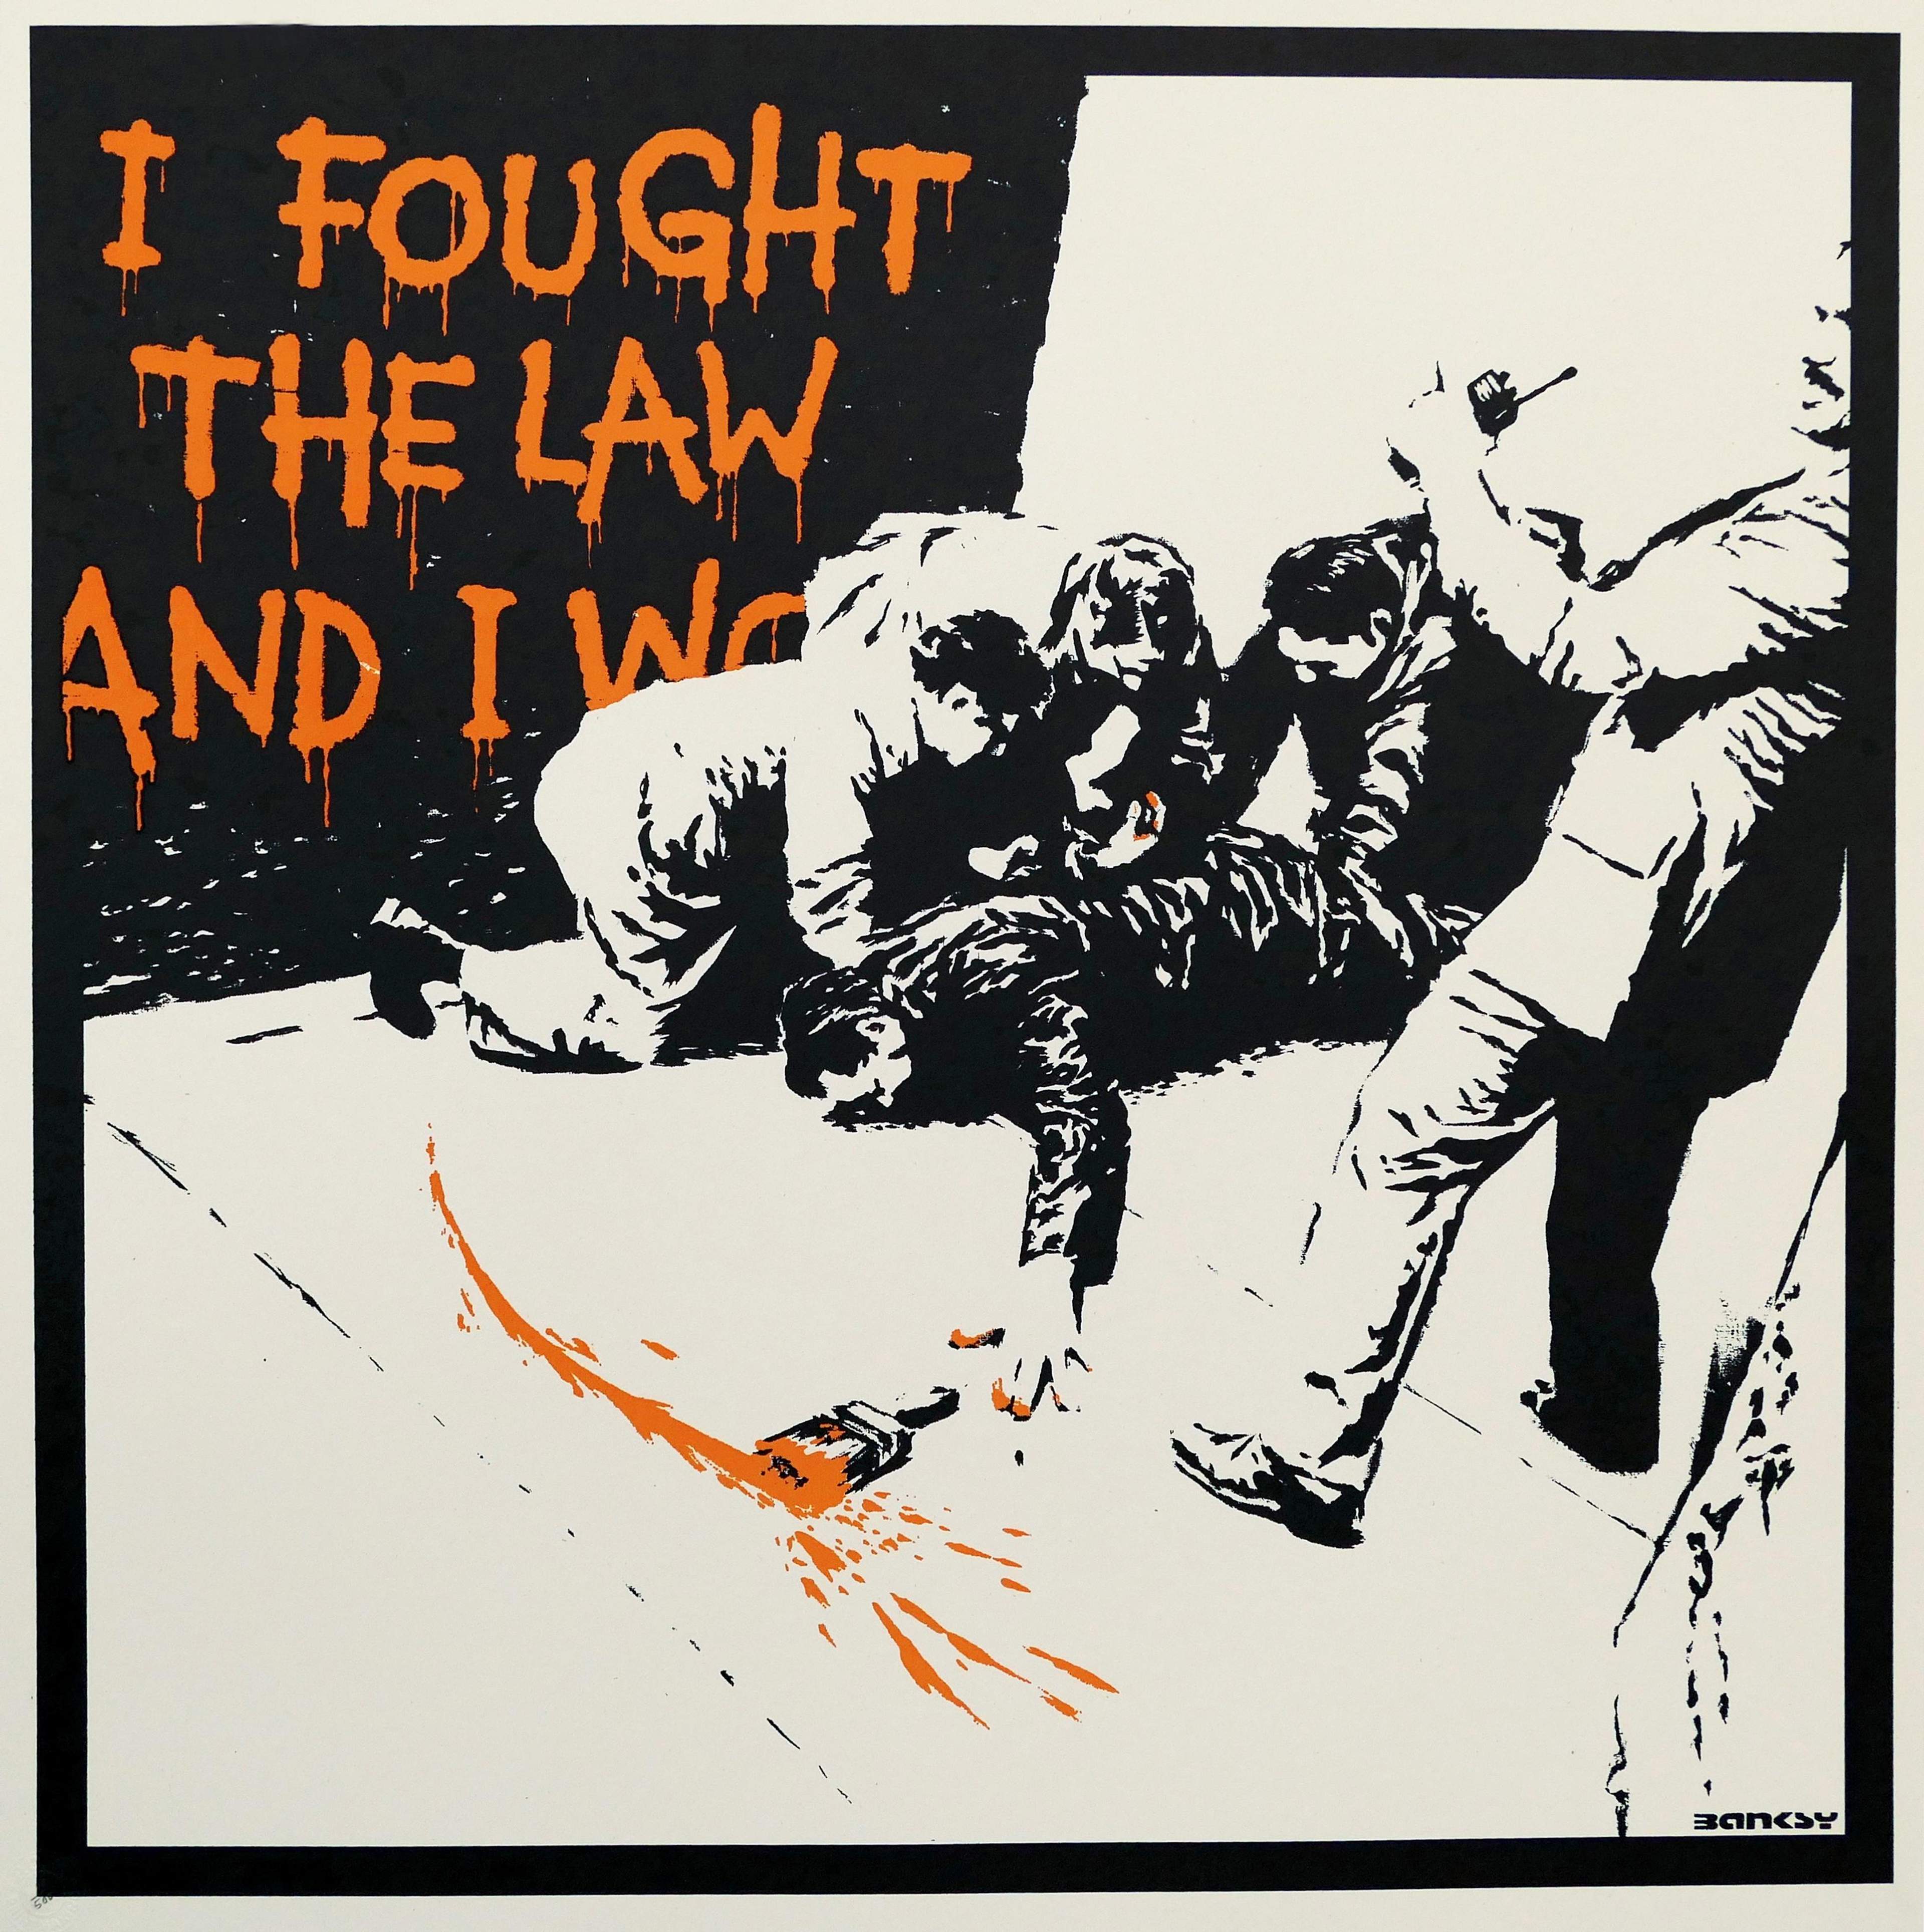 I Fought The Law - Unsigned Print